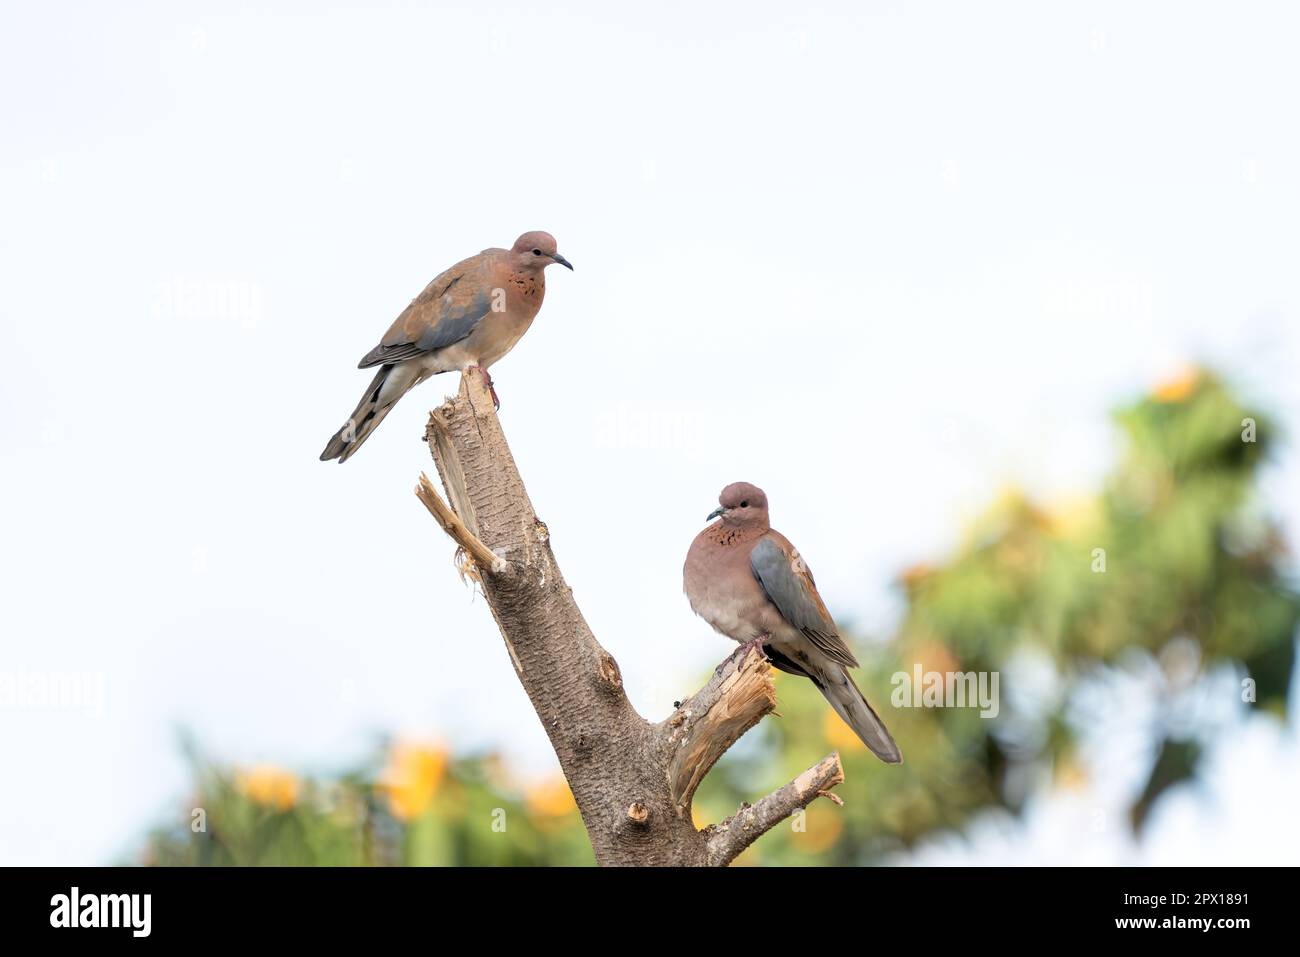 A pair of doves perched on top of a tree in Turkey Stock Photo